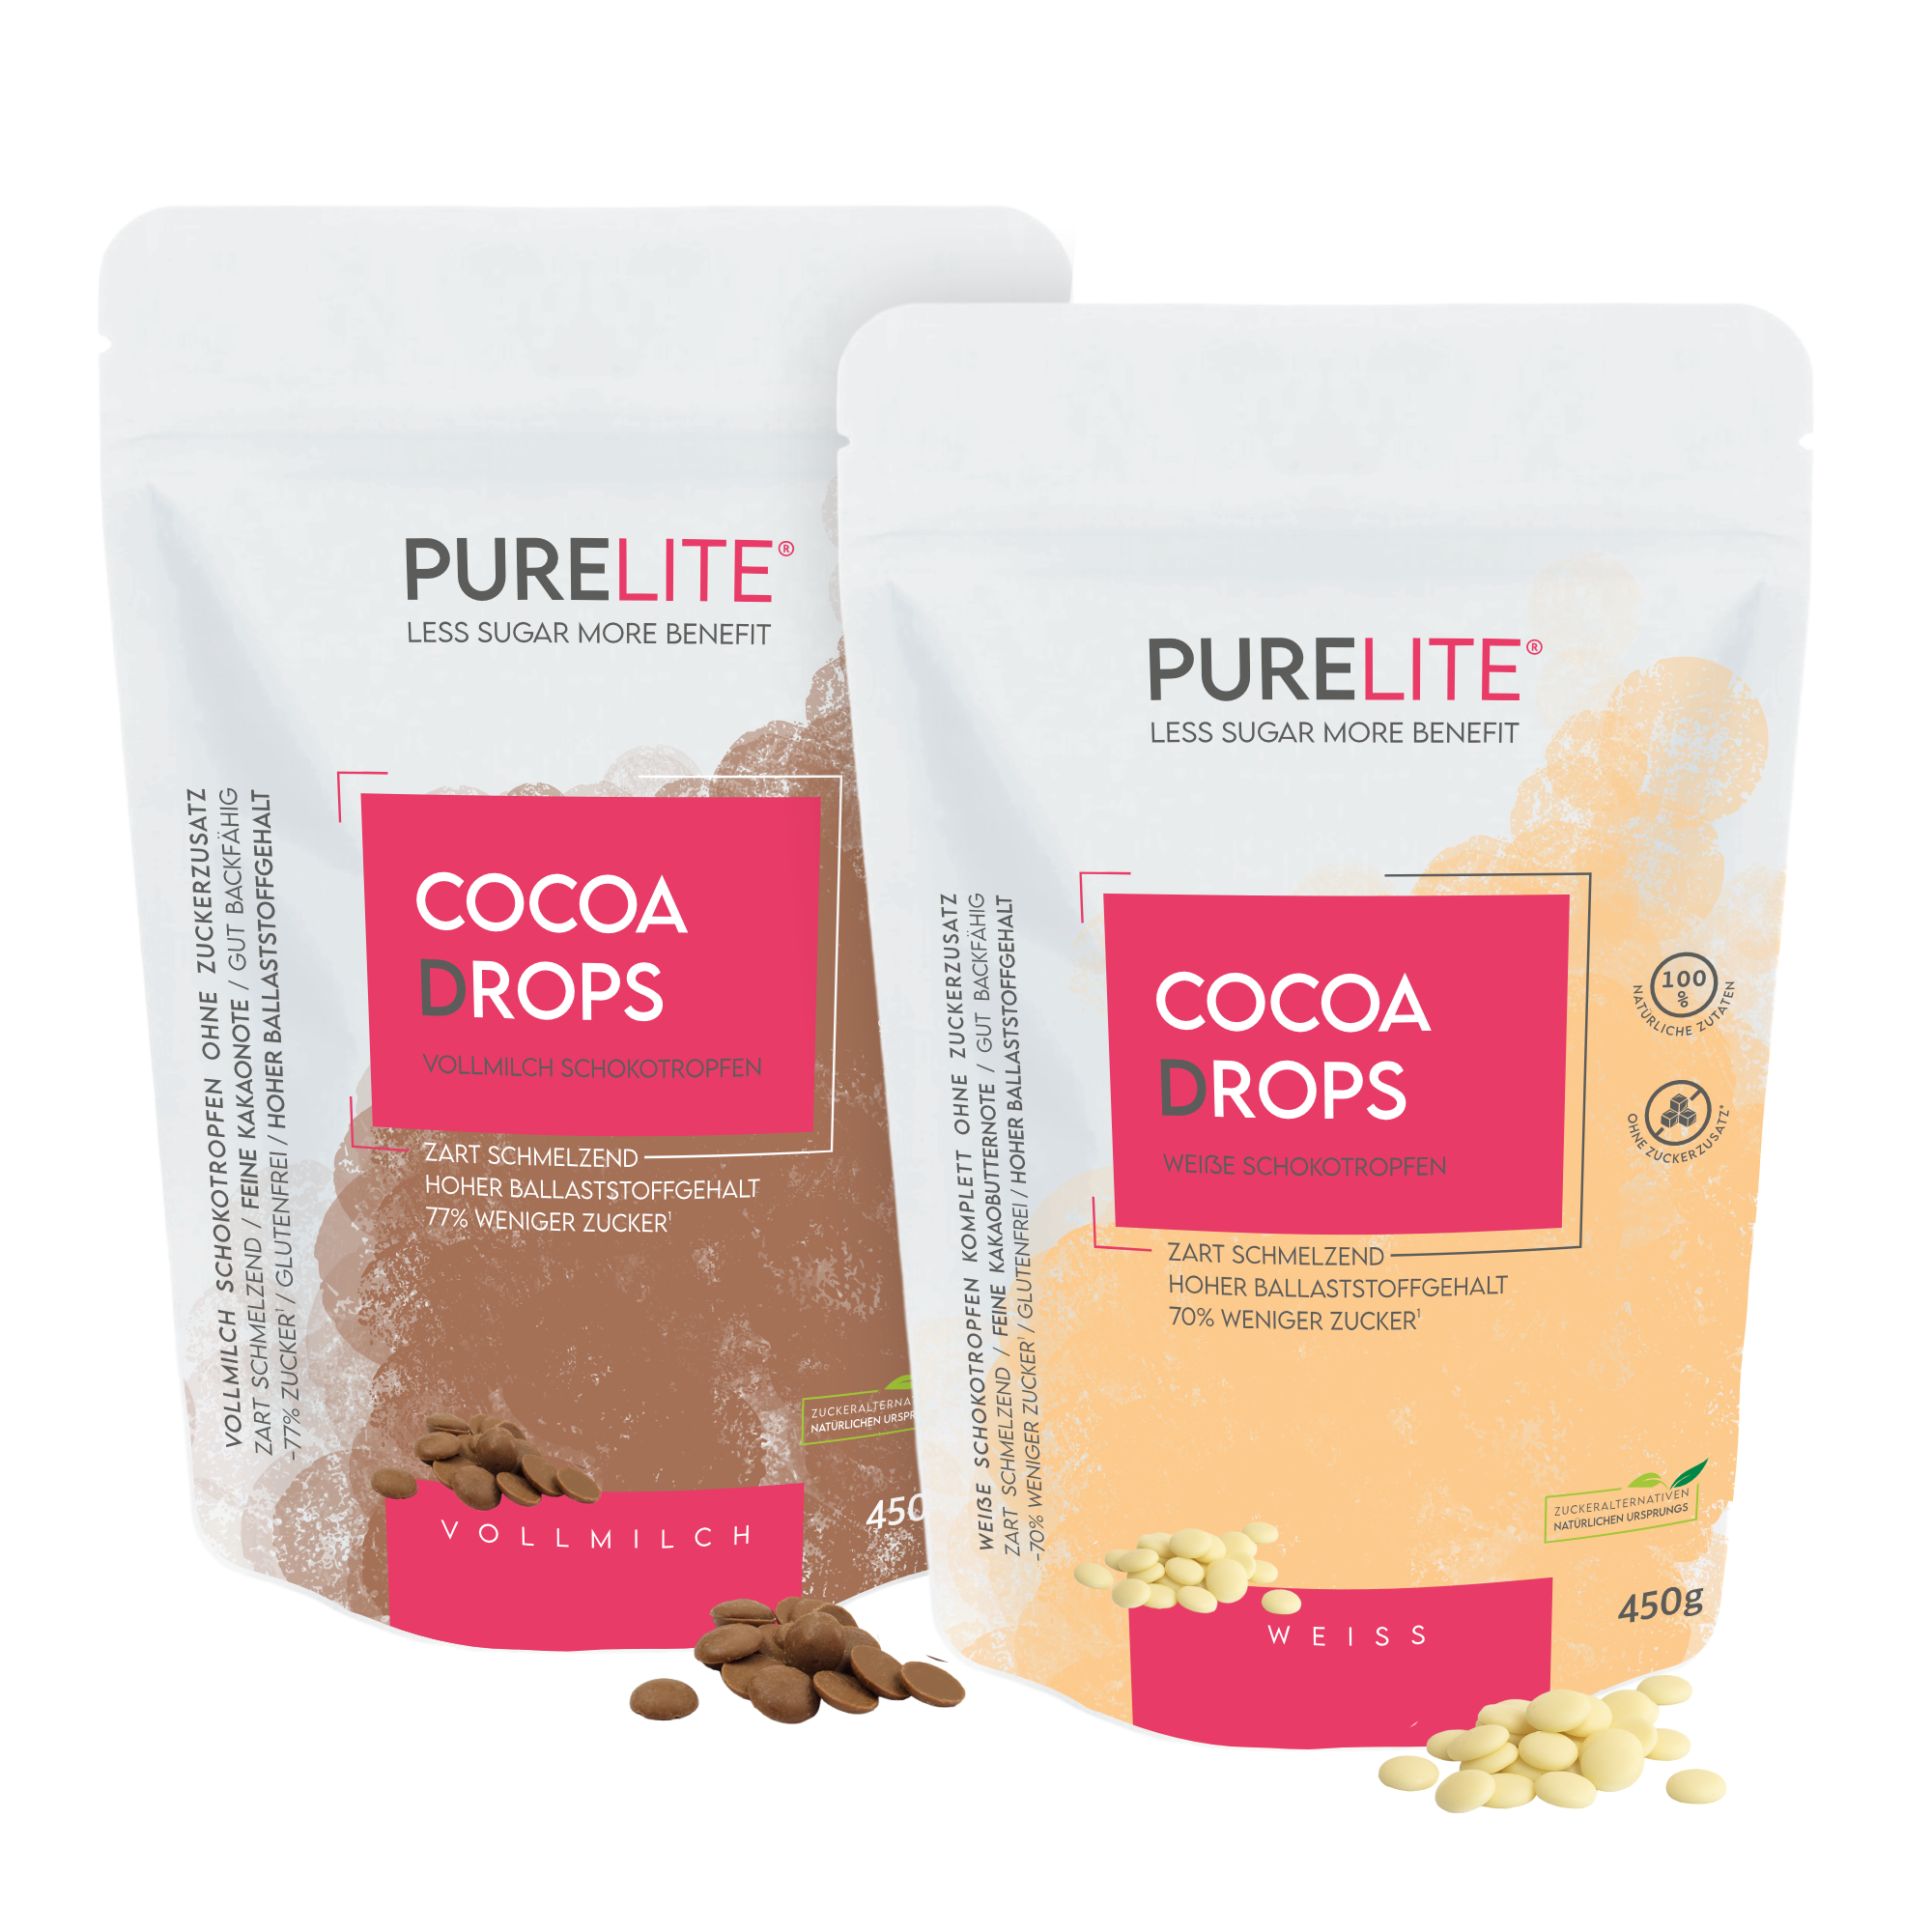 BUNDLE COCOA DROPS 1 x Vollmilch + 1 x Weiss 